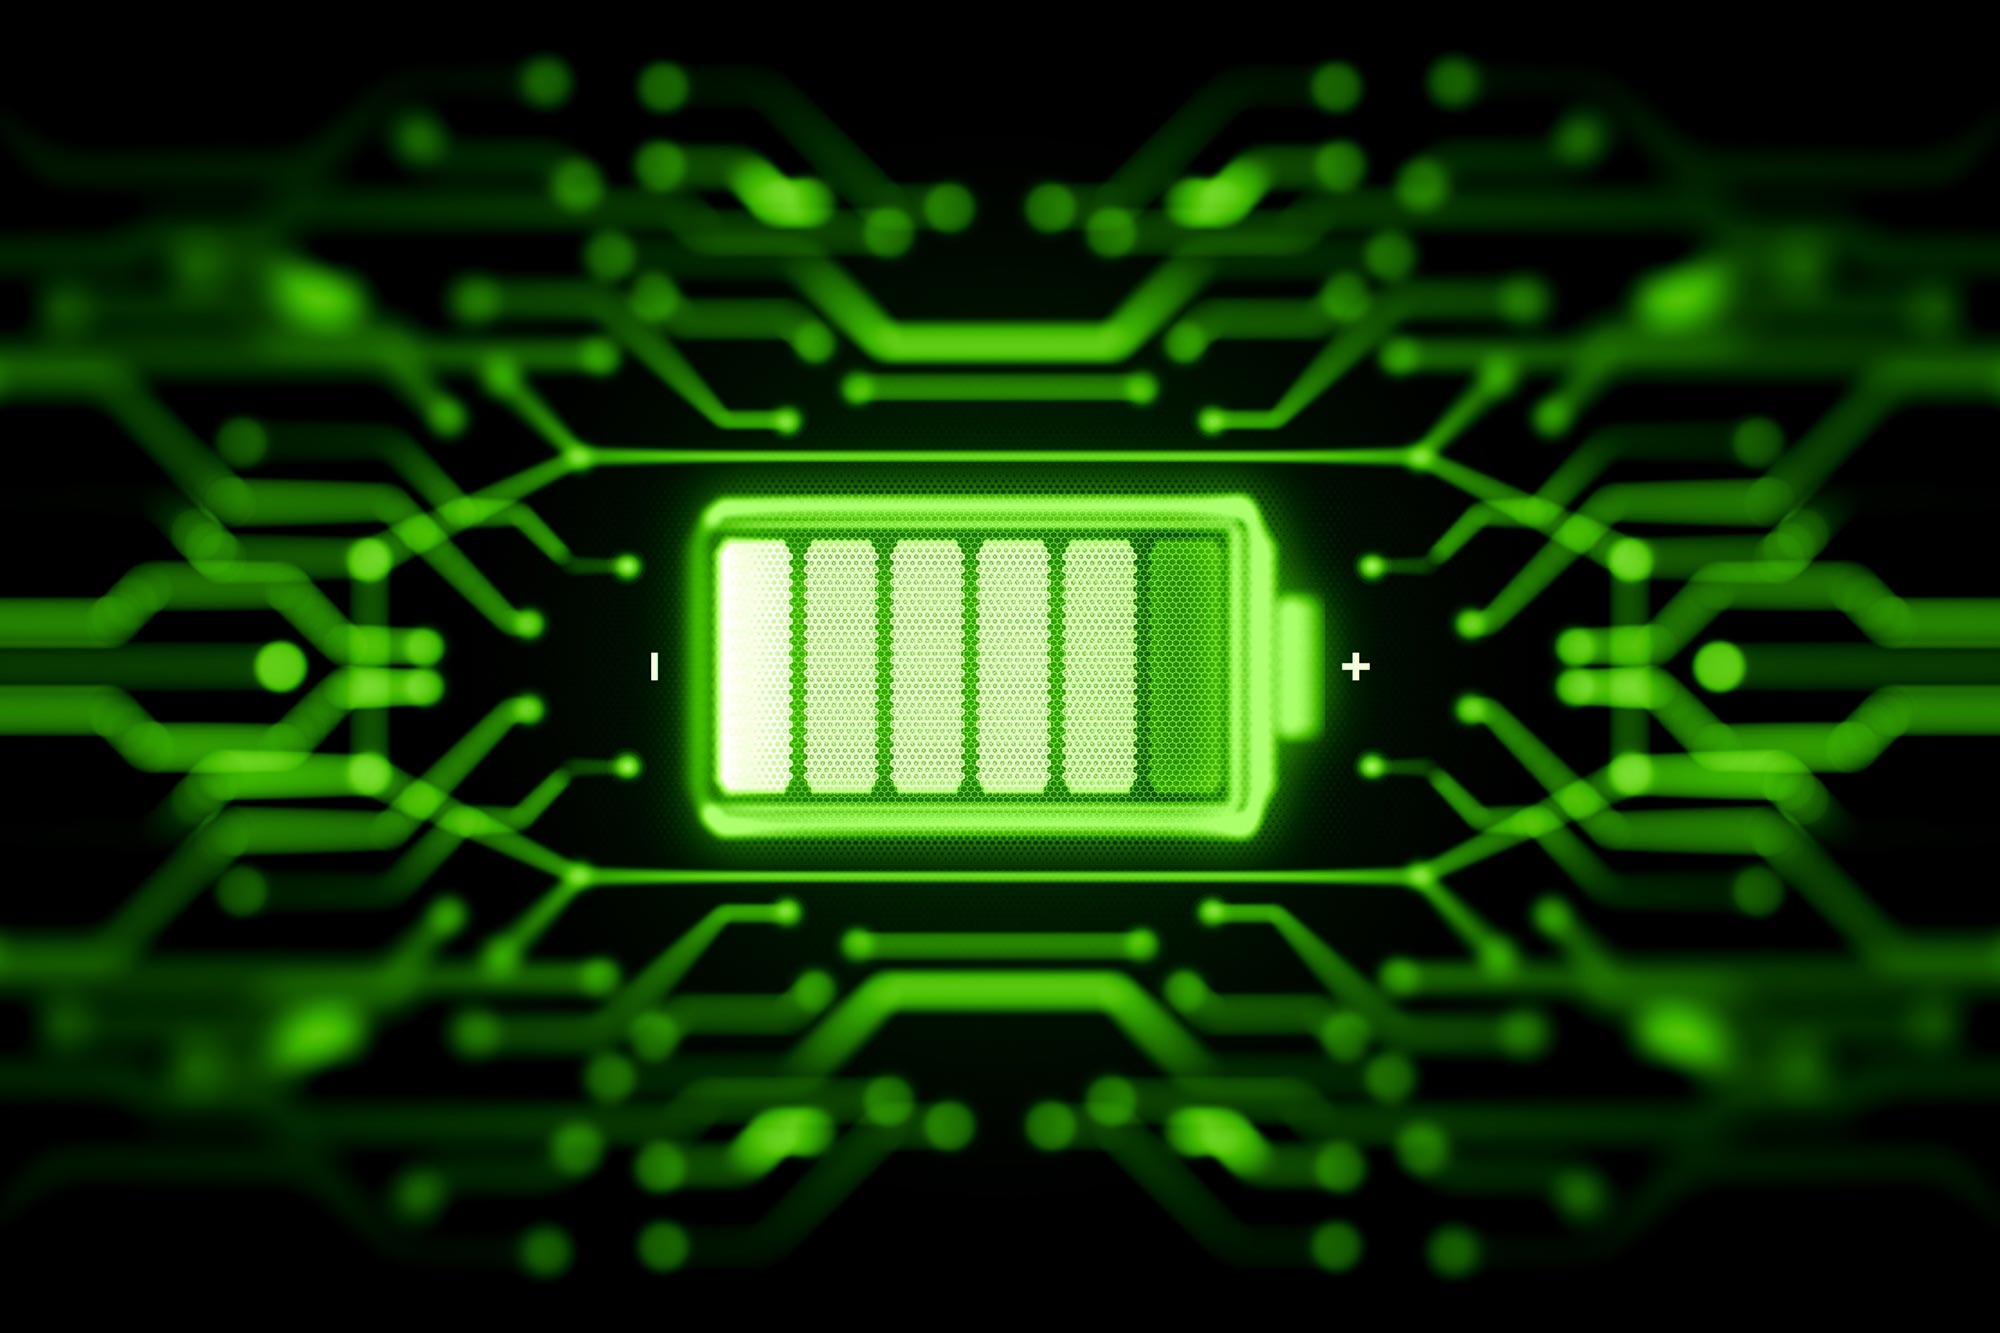 New AI-Driven Application Could Strengthen Smartphone Battery Daily life by 30%